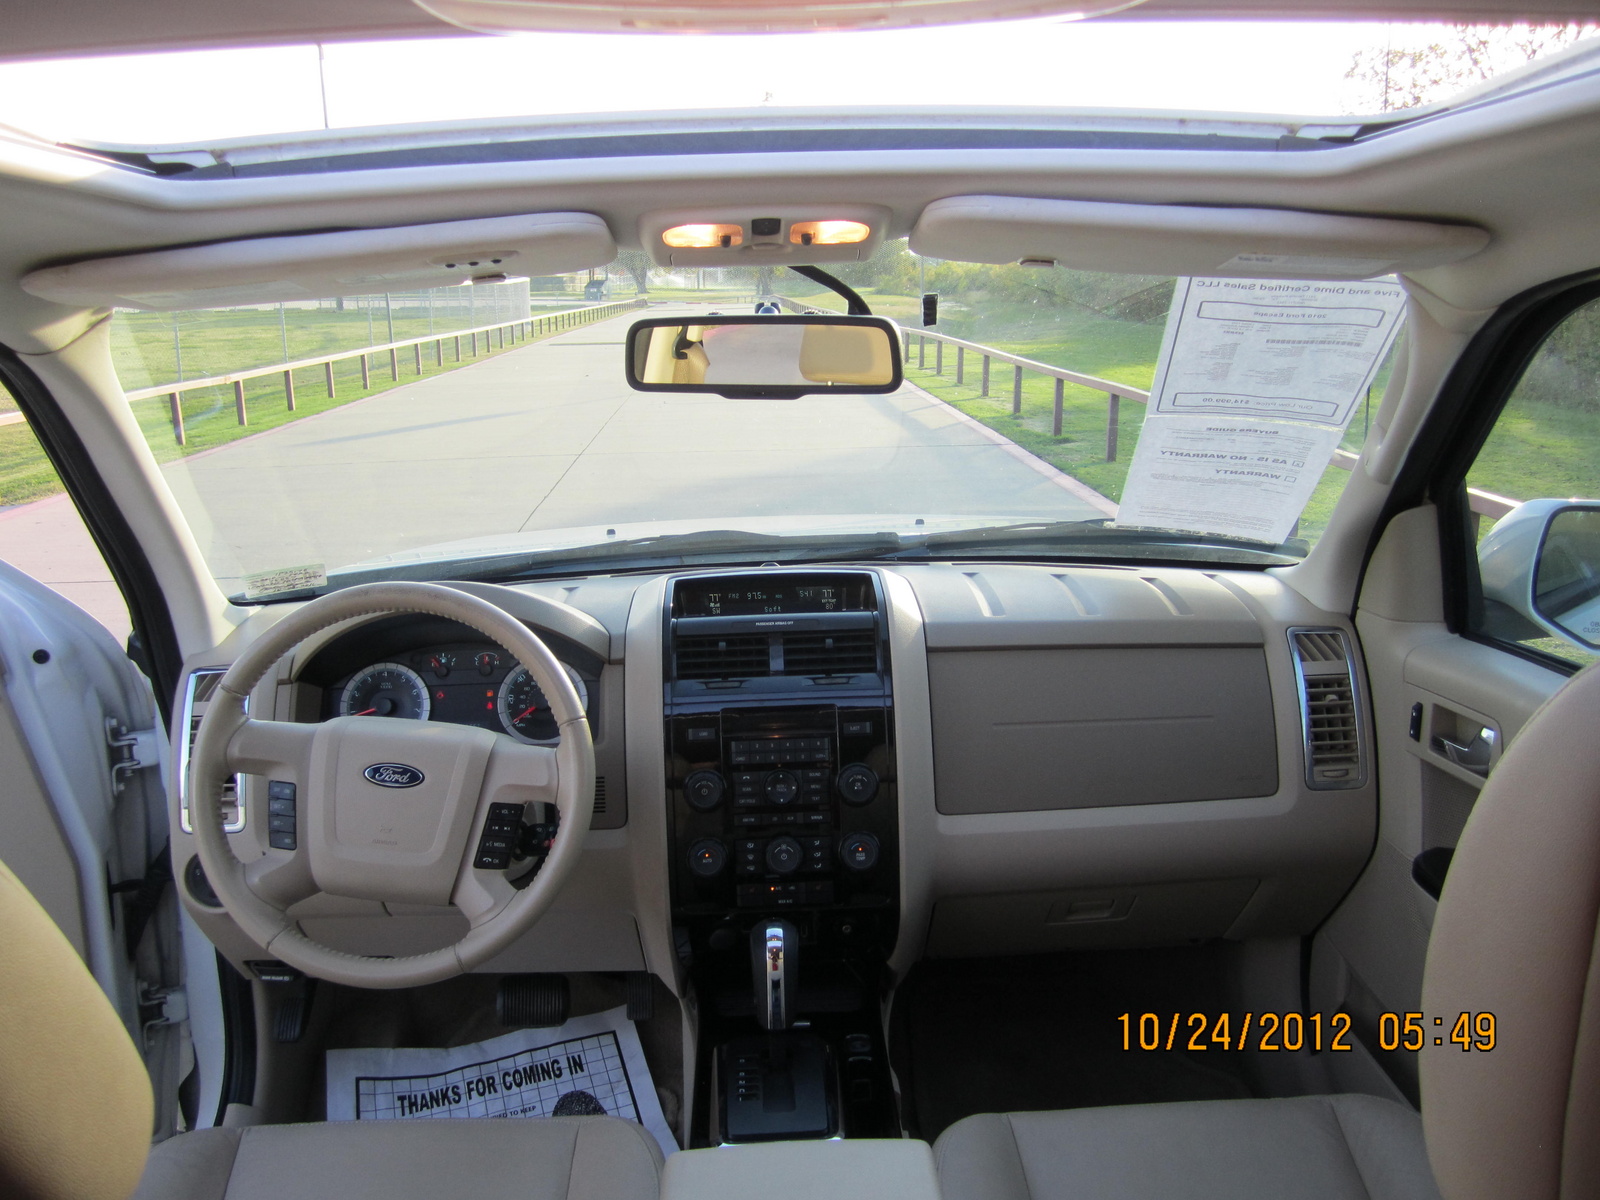 2010 Ford escape xlt standard features #1